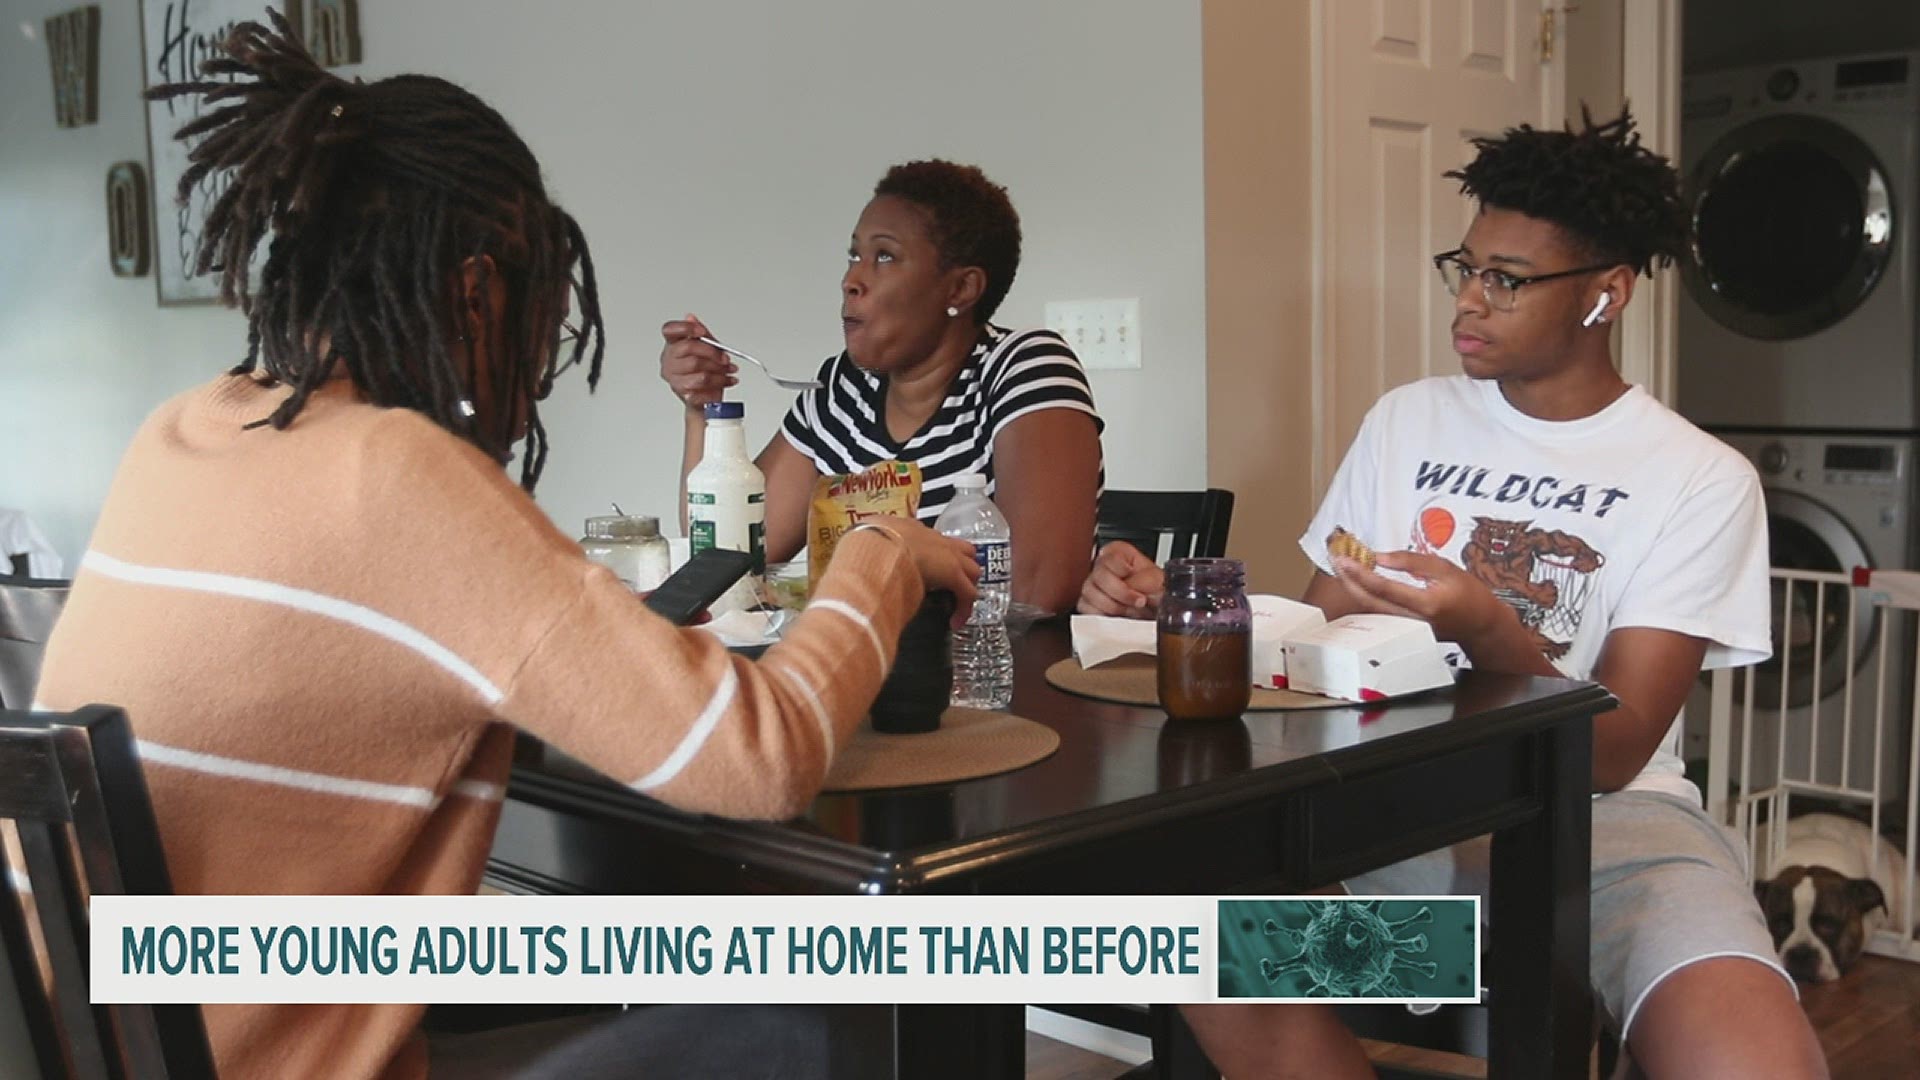 One local family is dealing with what millions of Americans are now: the return home of a young adult and offers hope and tips to deal.